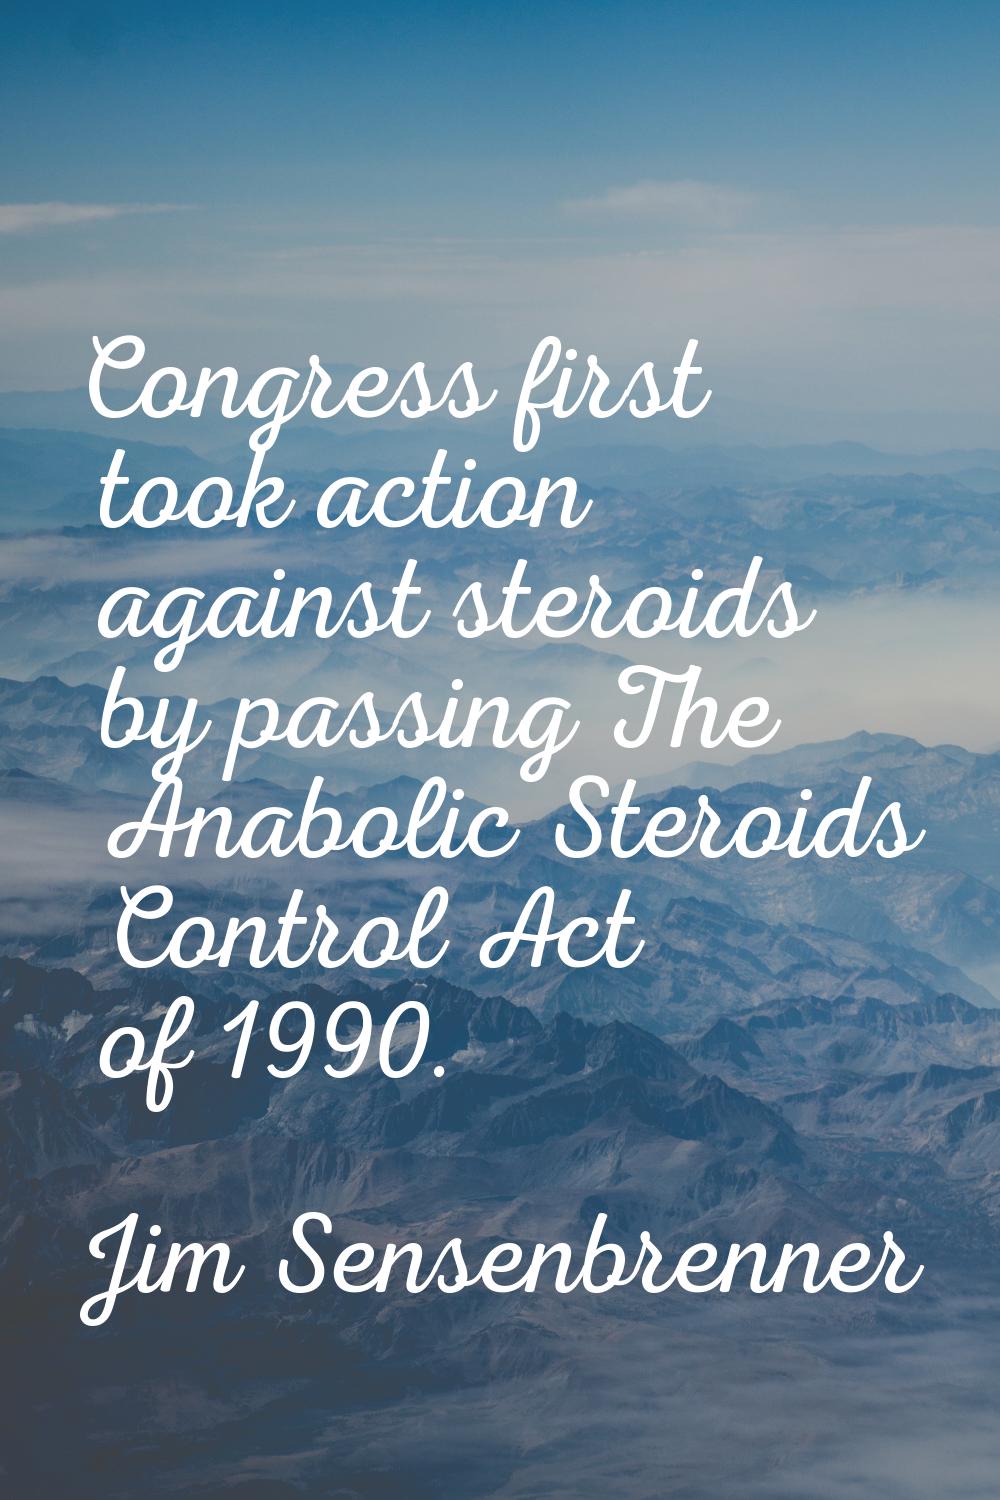 Congress first took action against steroids by passing The Anabolic Steroids Control Act of 1990.